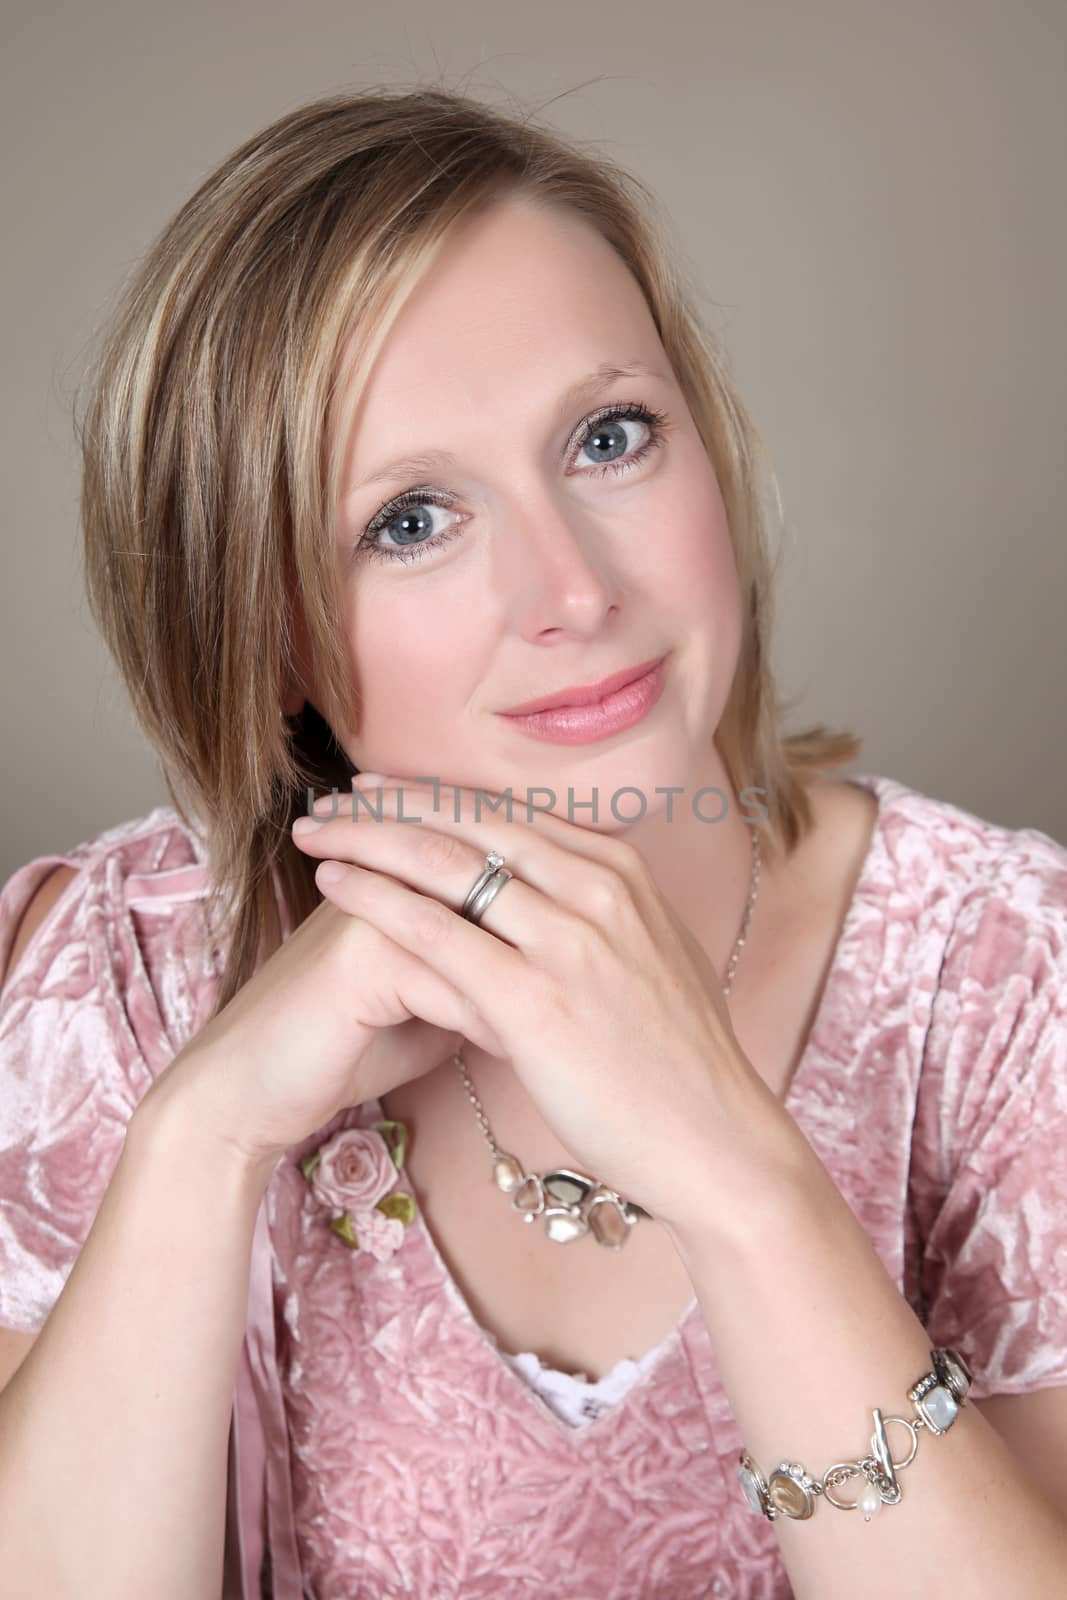 Portrait shot of beautiful blond woman against a brown background